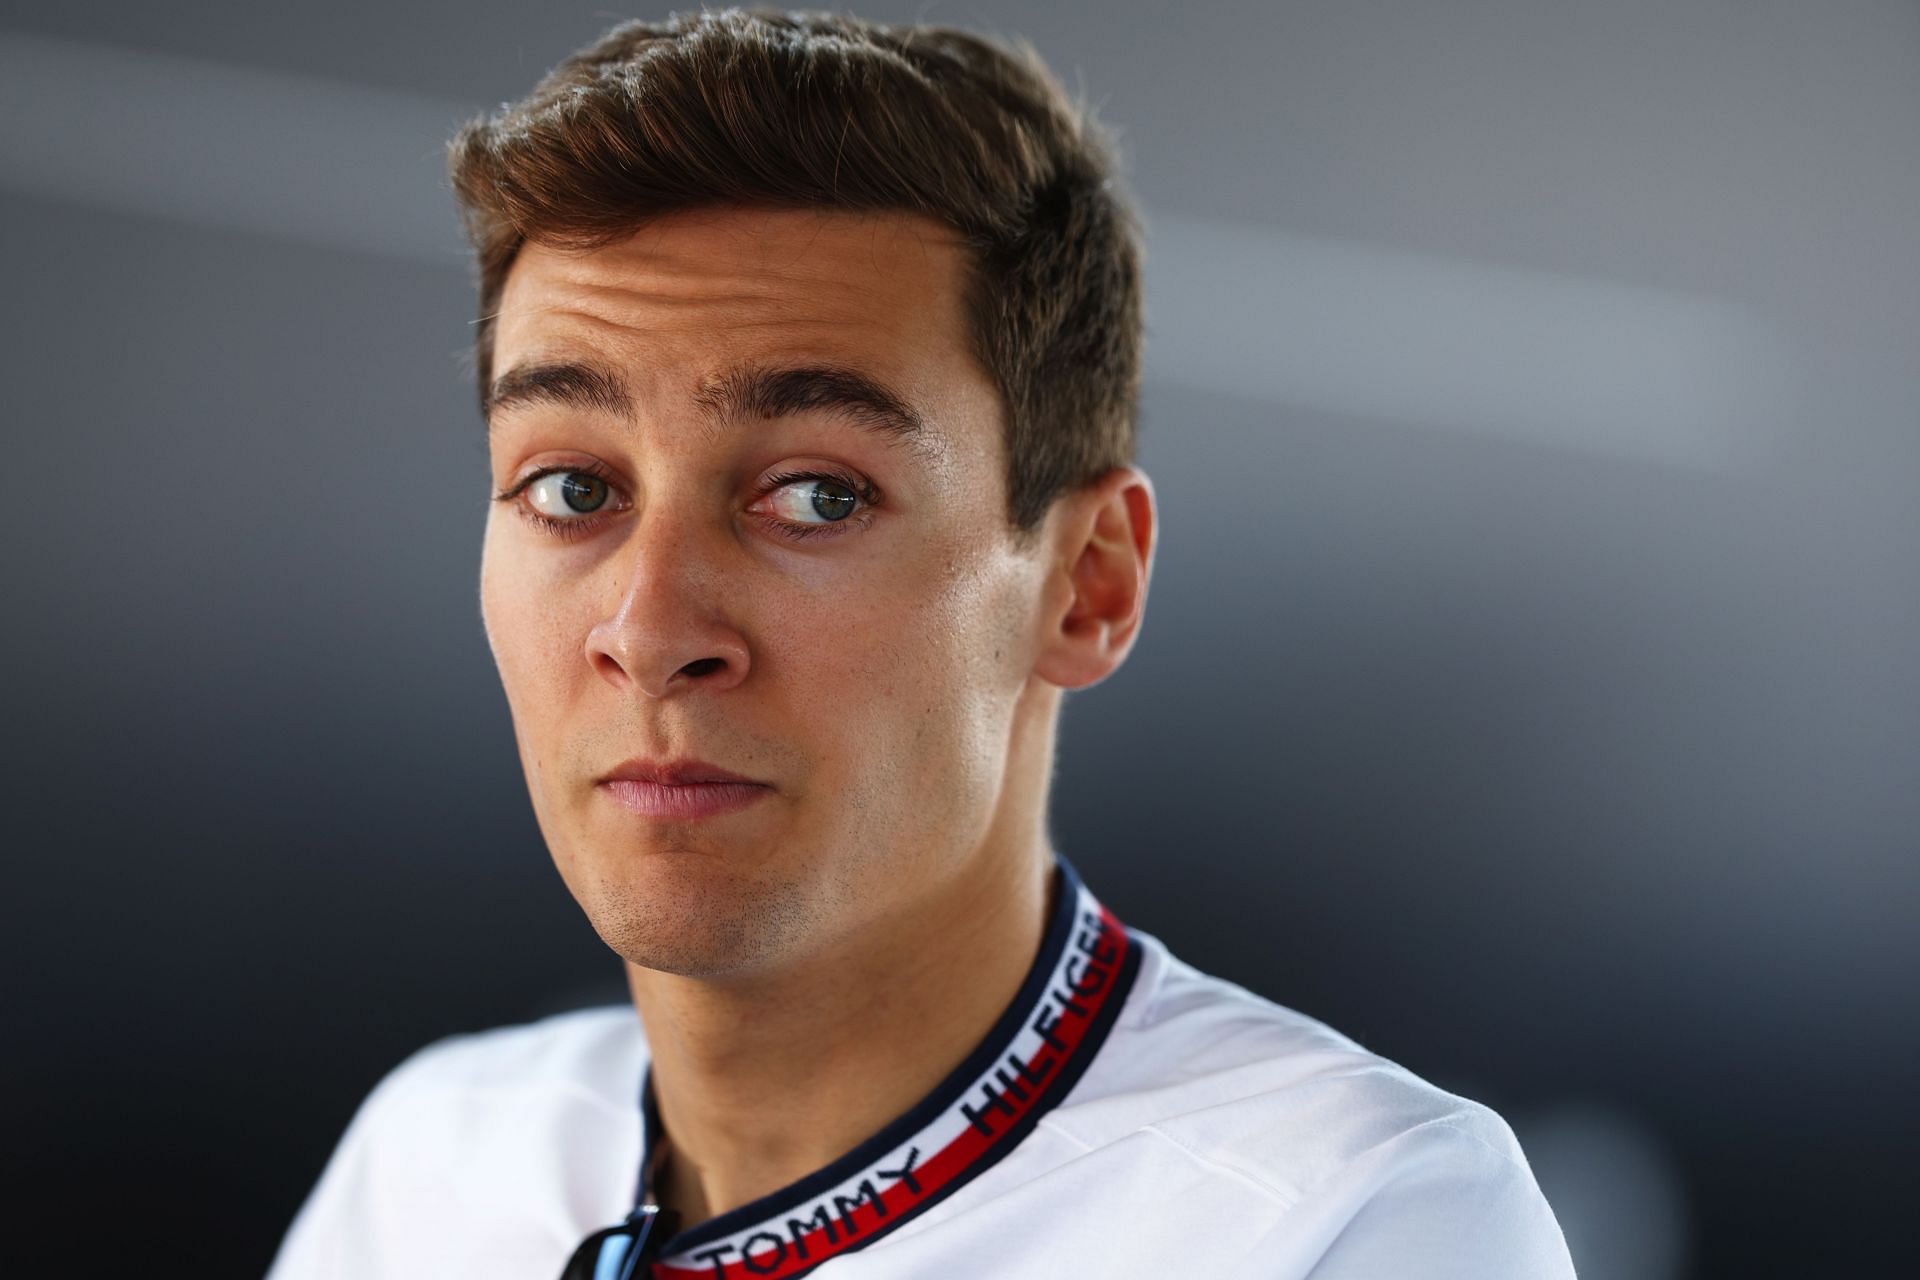 George Russell talks to the media in the Paddock prior to practice ahead of the F1 Grand Prix of Canada at Circuit Gilles Villeneuve on June 17, 2022 in Montreal, Quebec. (Photo by Clive Rose/Getty Images)